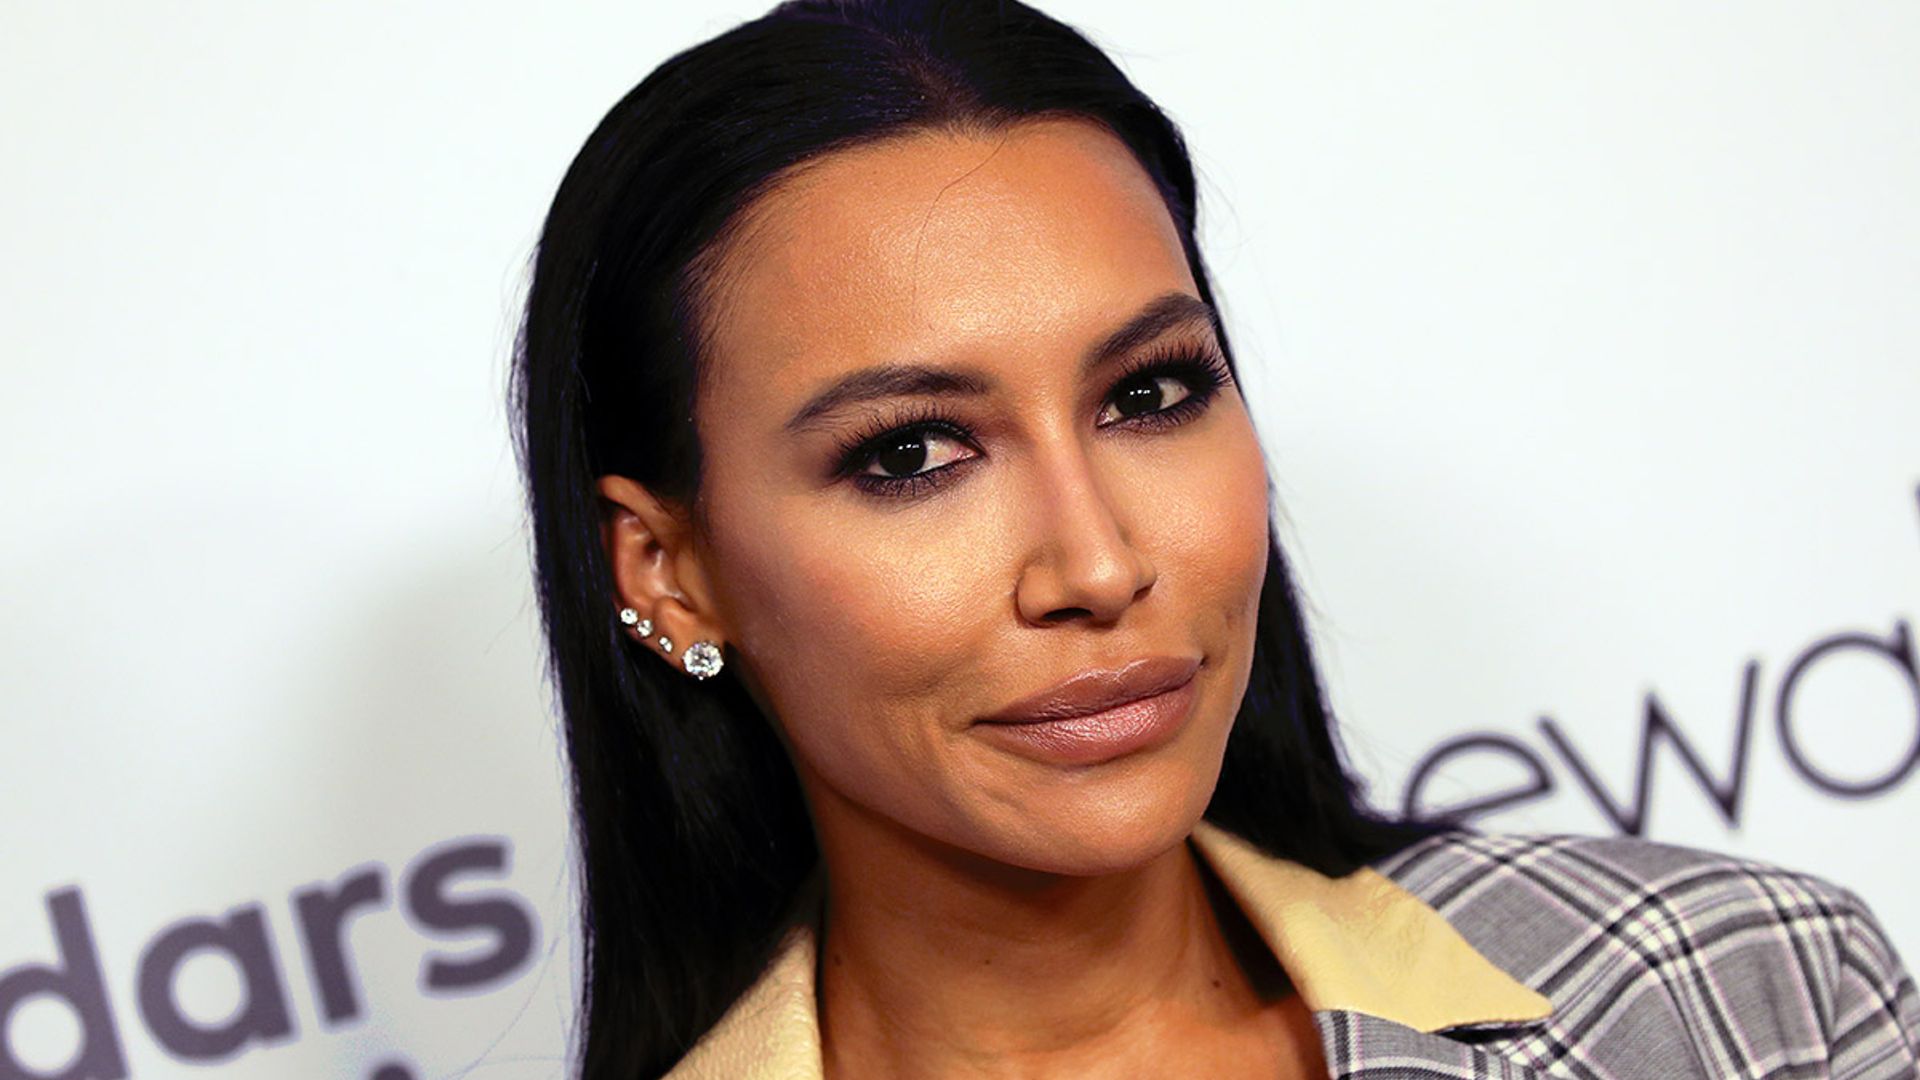 Body found in search of missing Glee actress Naya Rivera